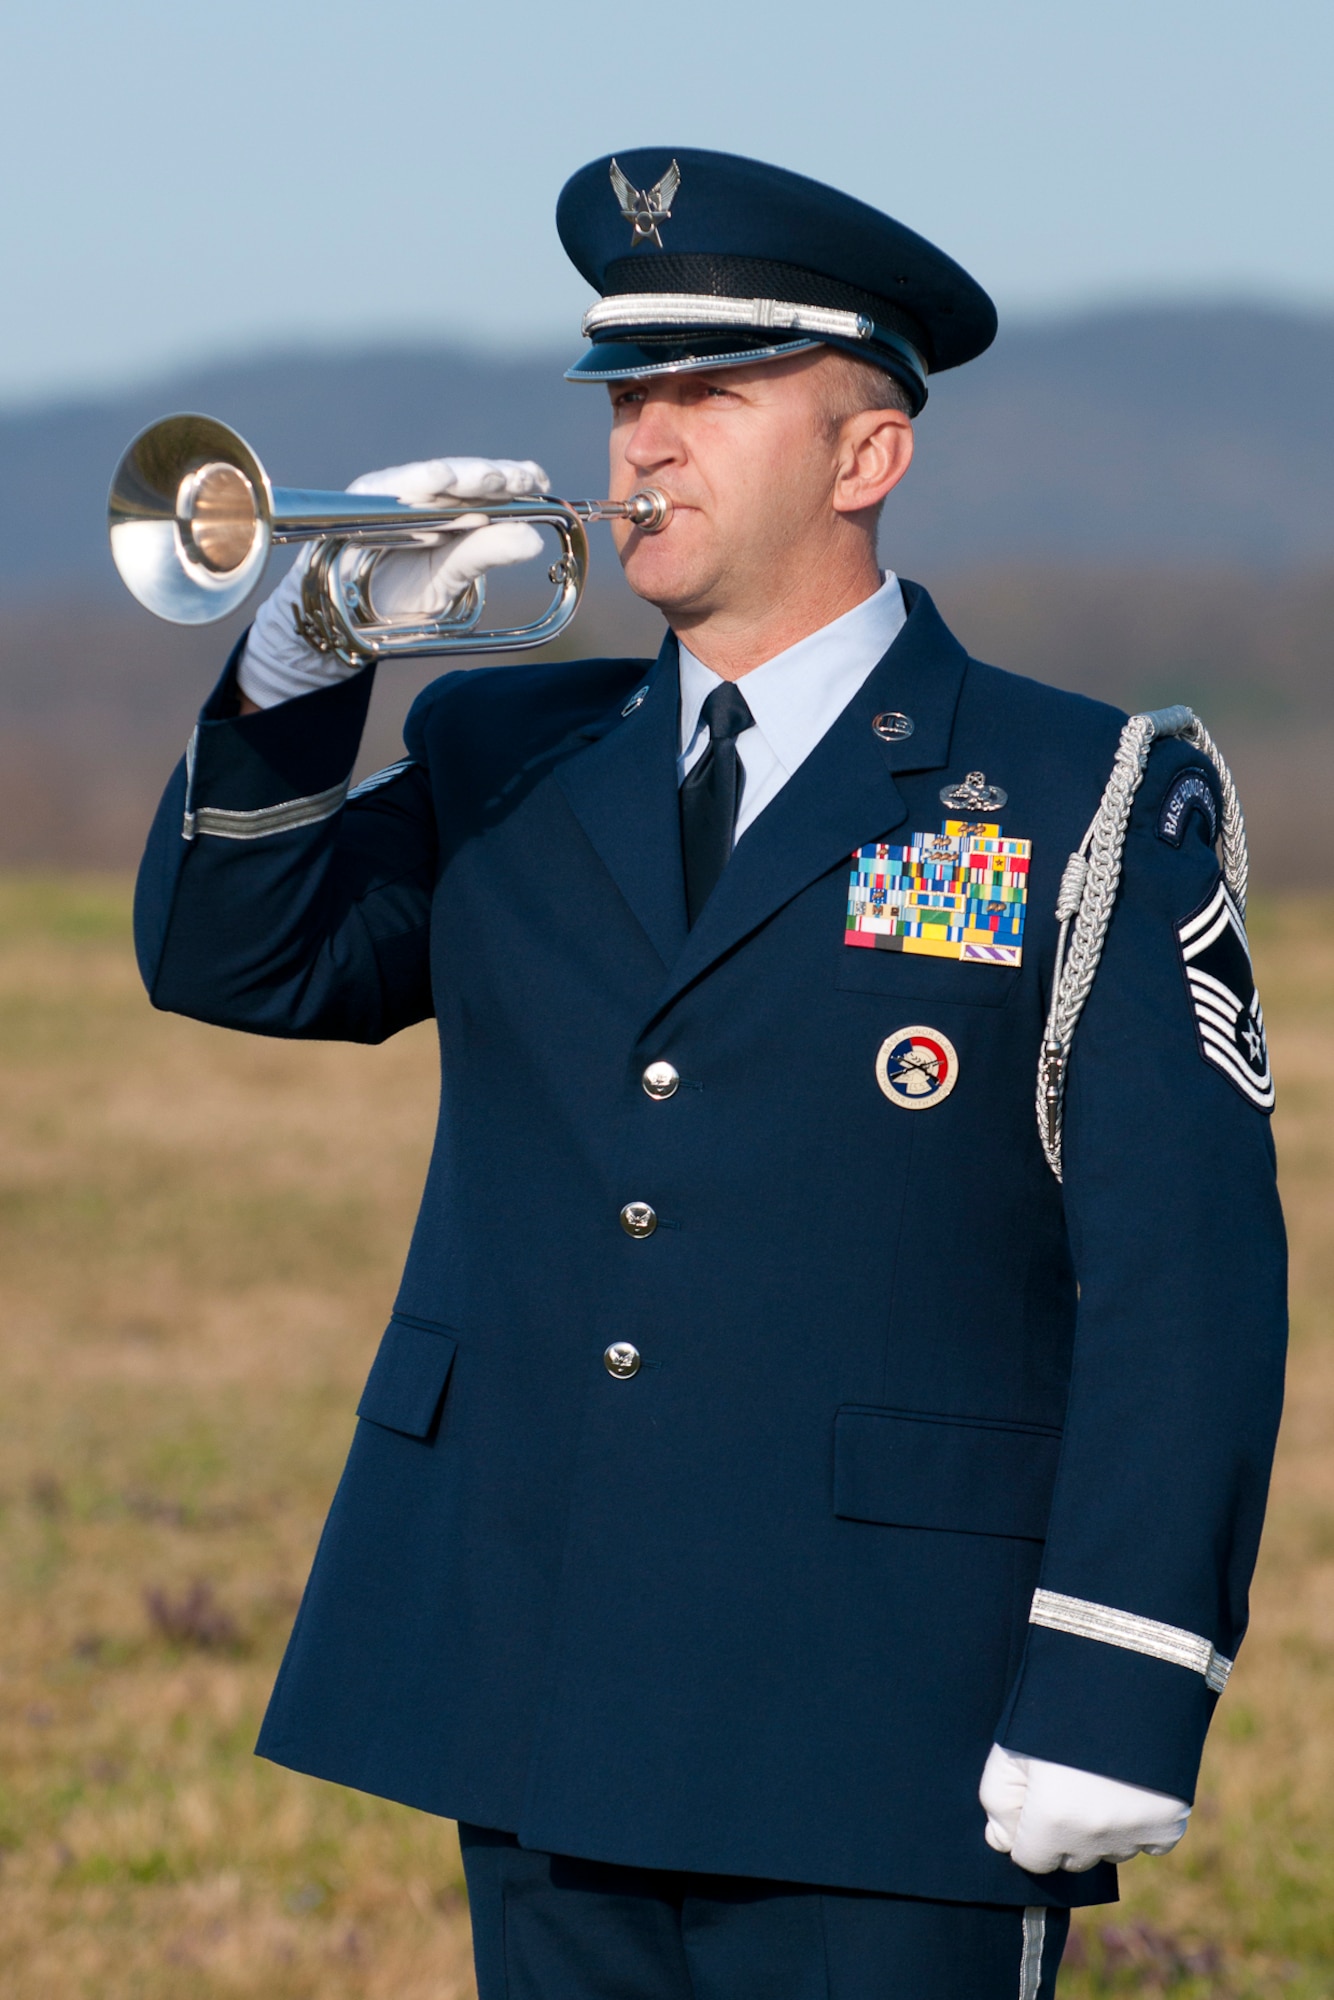 Senior Master Sgt Todd Kirkwood, 167th Airlift Wing avionics supervisor and base honor guard member, recently stepped up to play Taps at a funeral when the electronic device in the Ceremonial Bugle being used by the civilian color guard team failed to sound. Kirkwood and one other member of the unit's honor guard were tasked to fold the flag and present it to the family, but when the bugle failed Kirkwood was able to remove the electronic device from the instrument and sound Taps, which he only recently learned to play. (U.S. Air Force photo by Master Sgt. Emily Beightol-Deyerle)